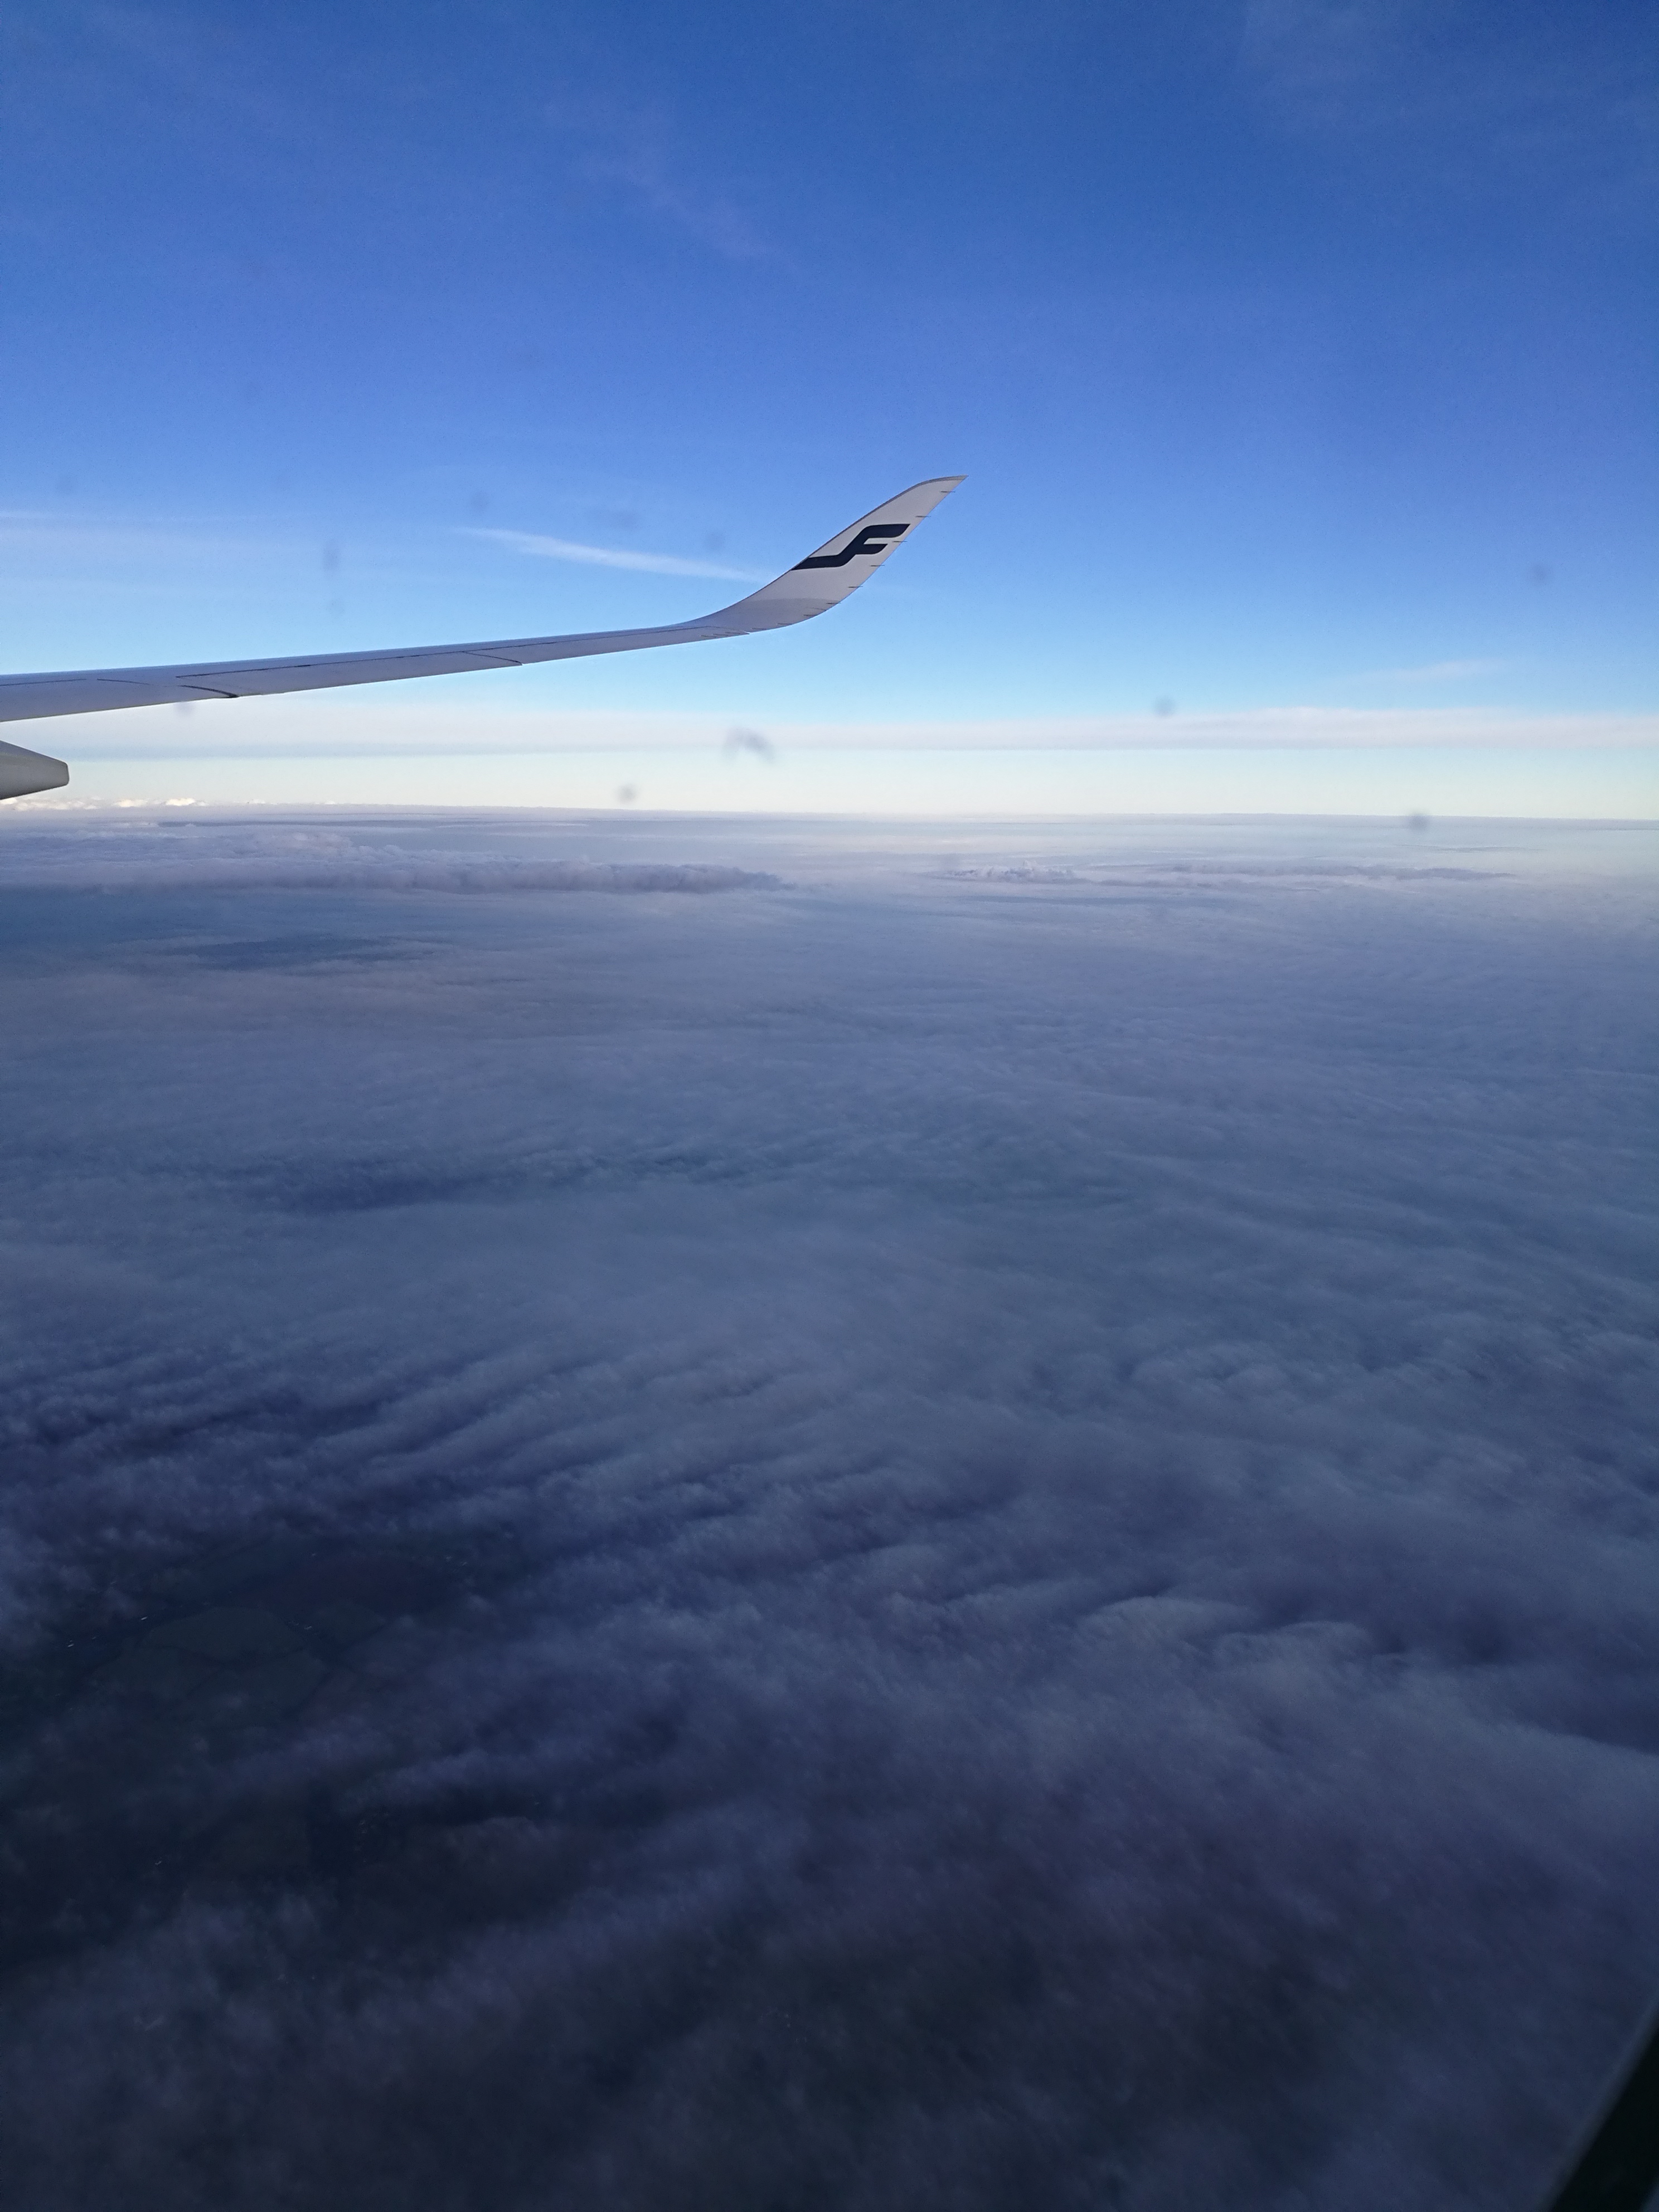 A few things about flying A view from the window of a Finnair airplane above the clouds